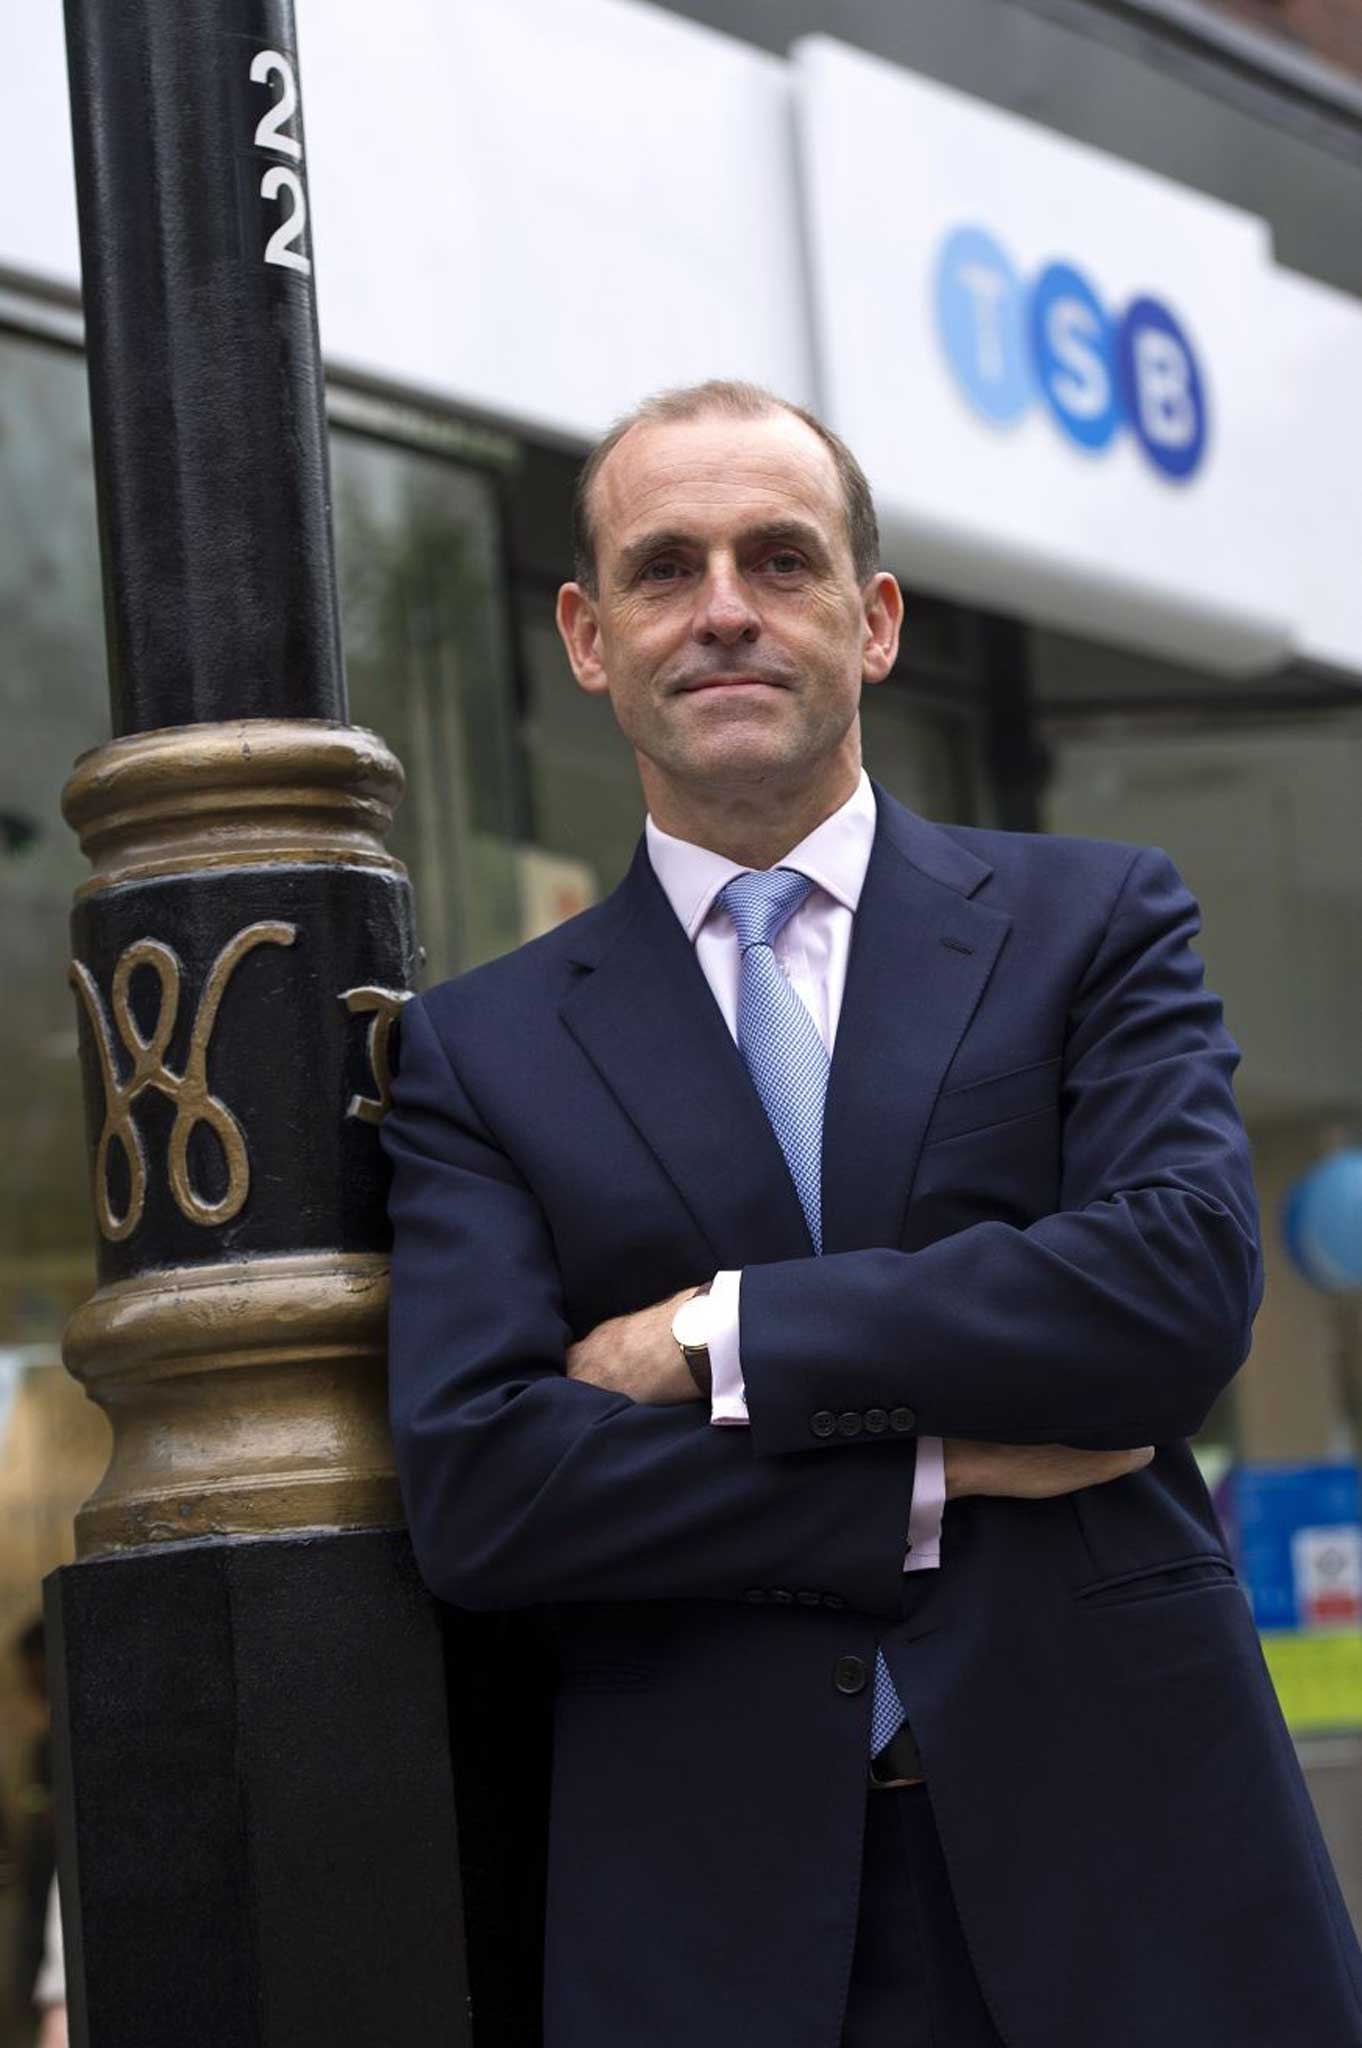 TSB boss Paul Pester wants to take on the high street giants and 'help create thriving local communities all across Britain'